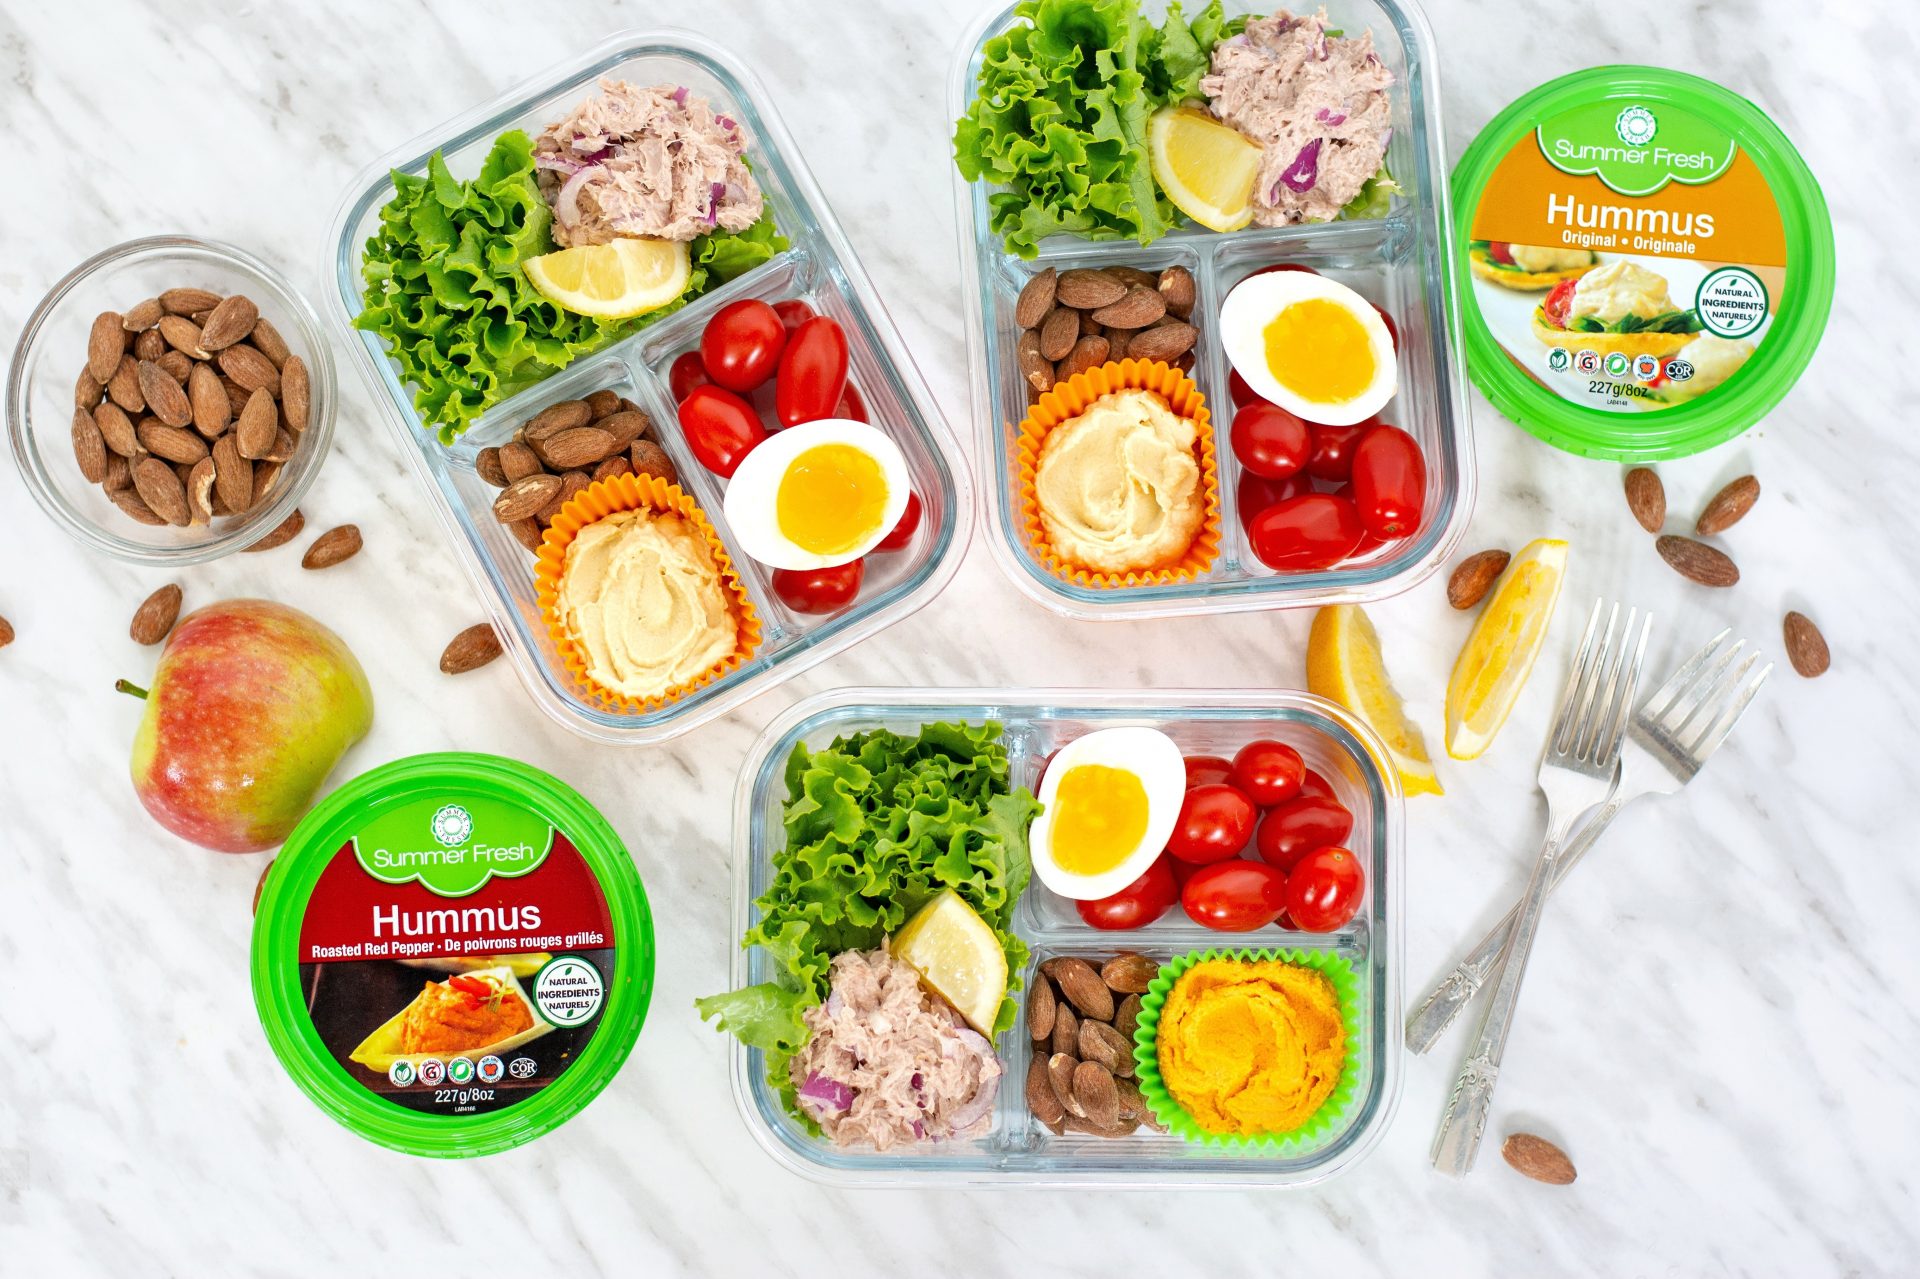 meal kits with salad and other vegetables and snacks, using Summer Fresh products beauty image